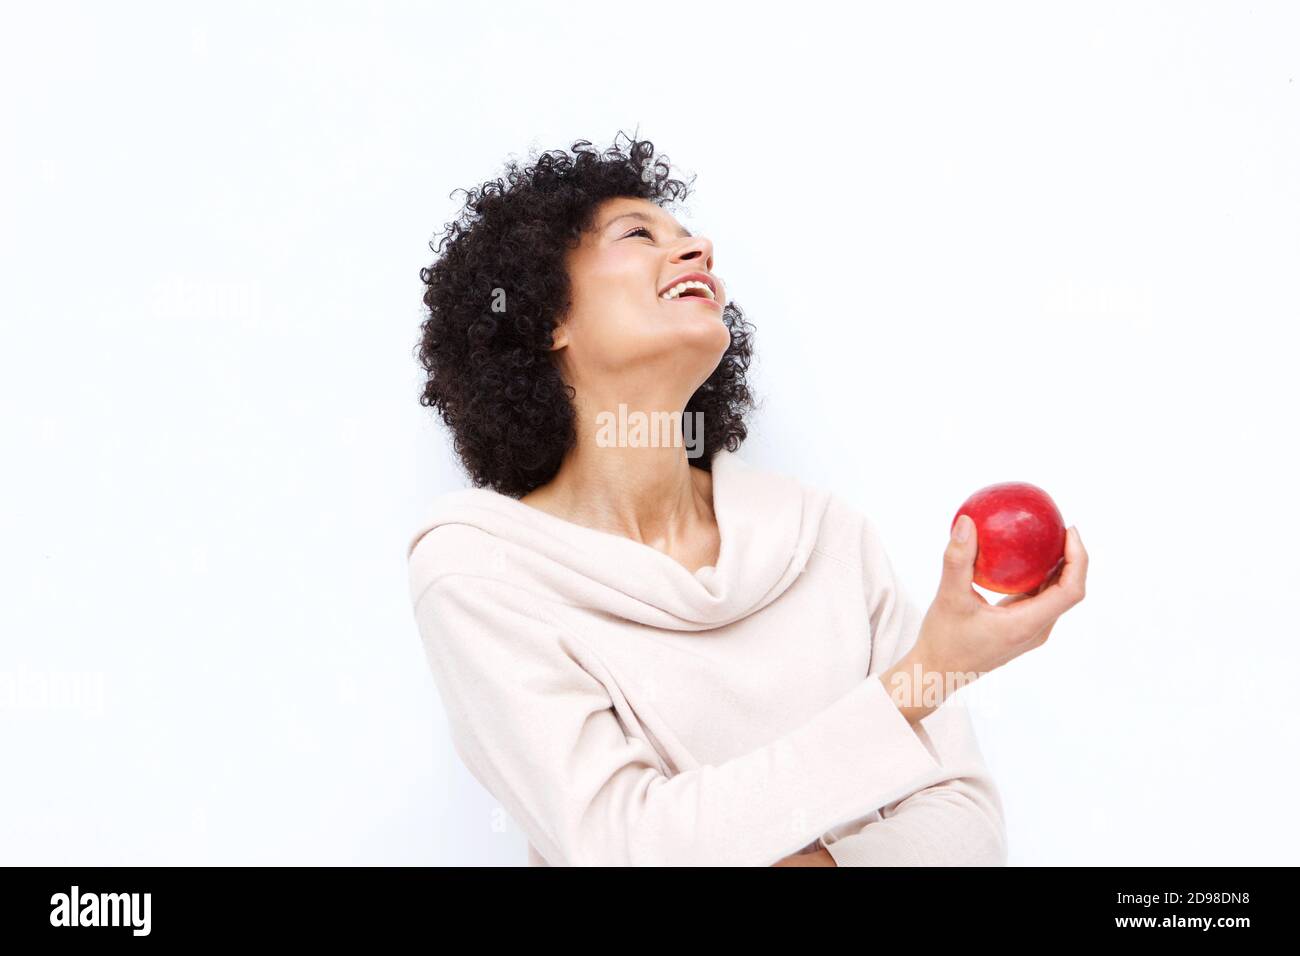 Portrait of happy woman holding apple against white background Stock Photo